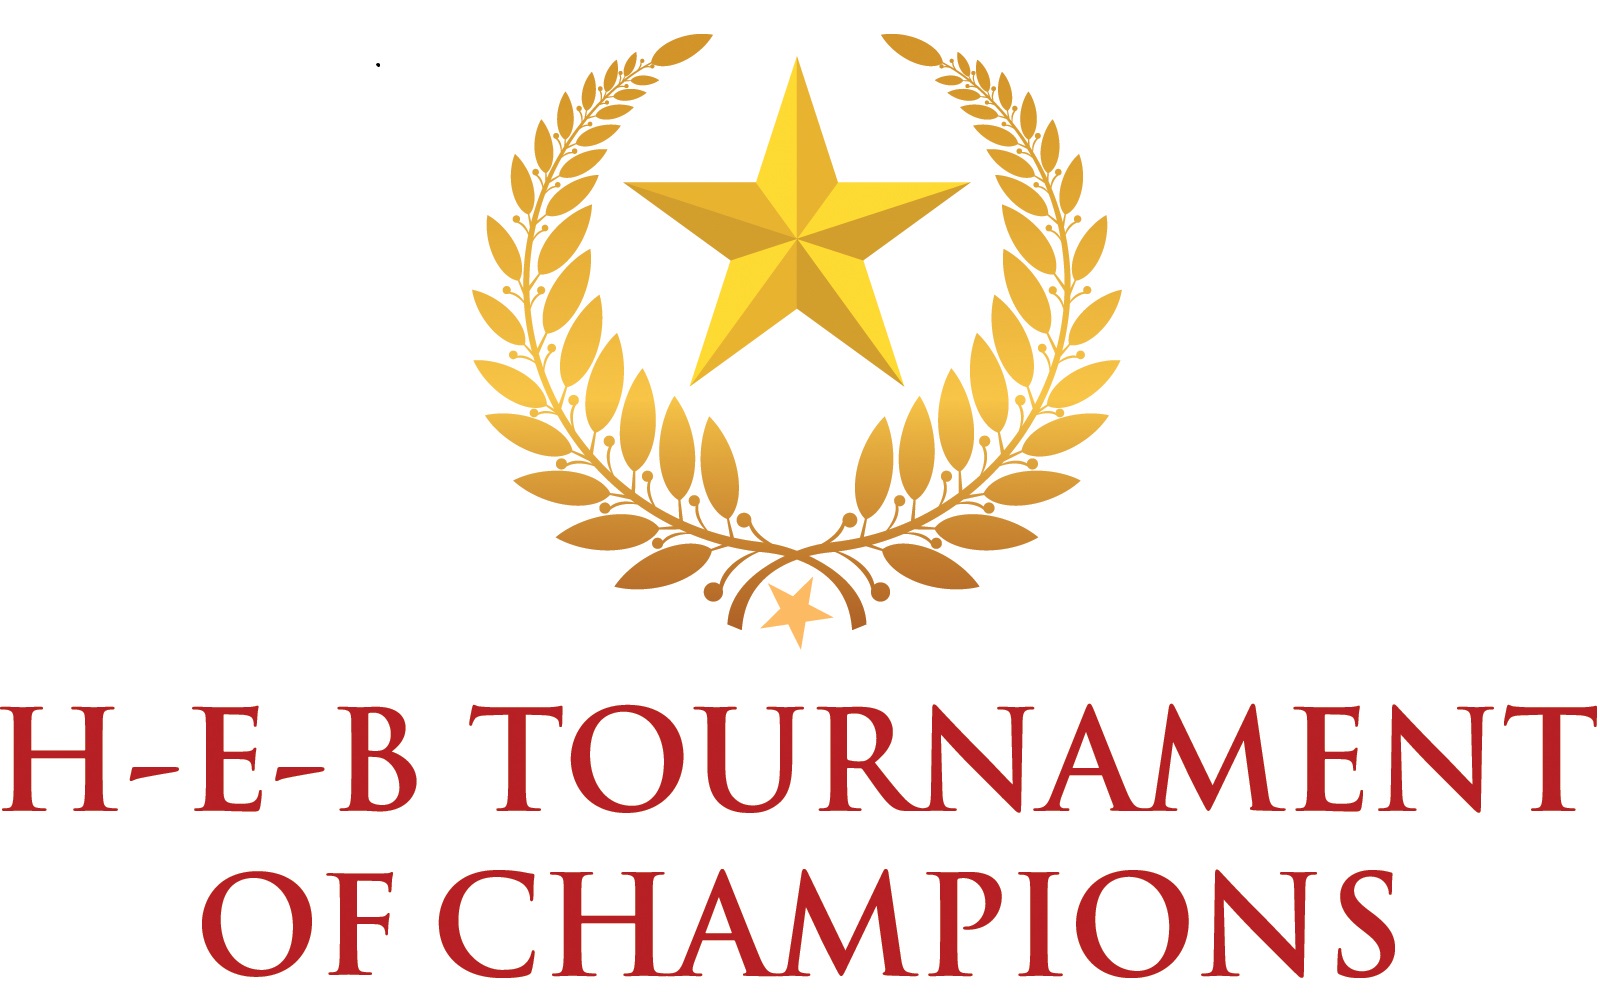 HEB tournament of champions logo as of 7-25-2014.jpg